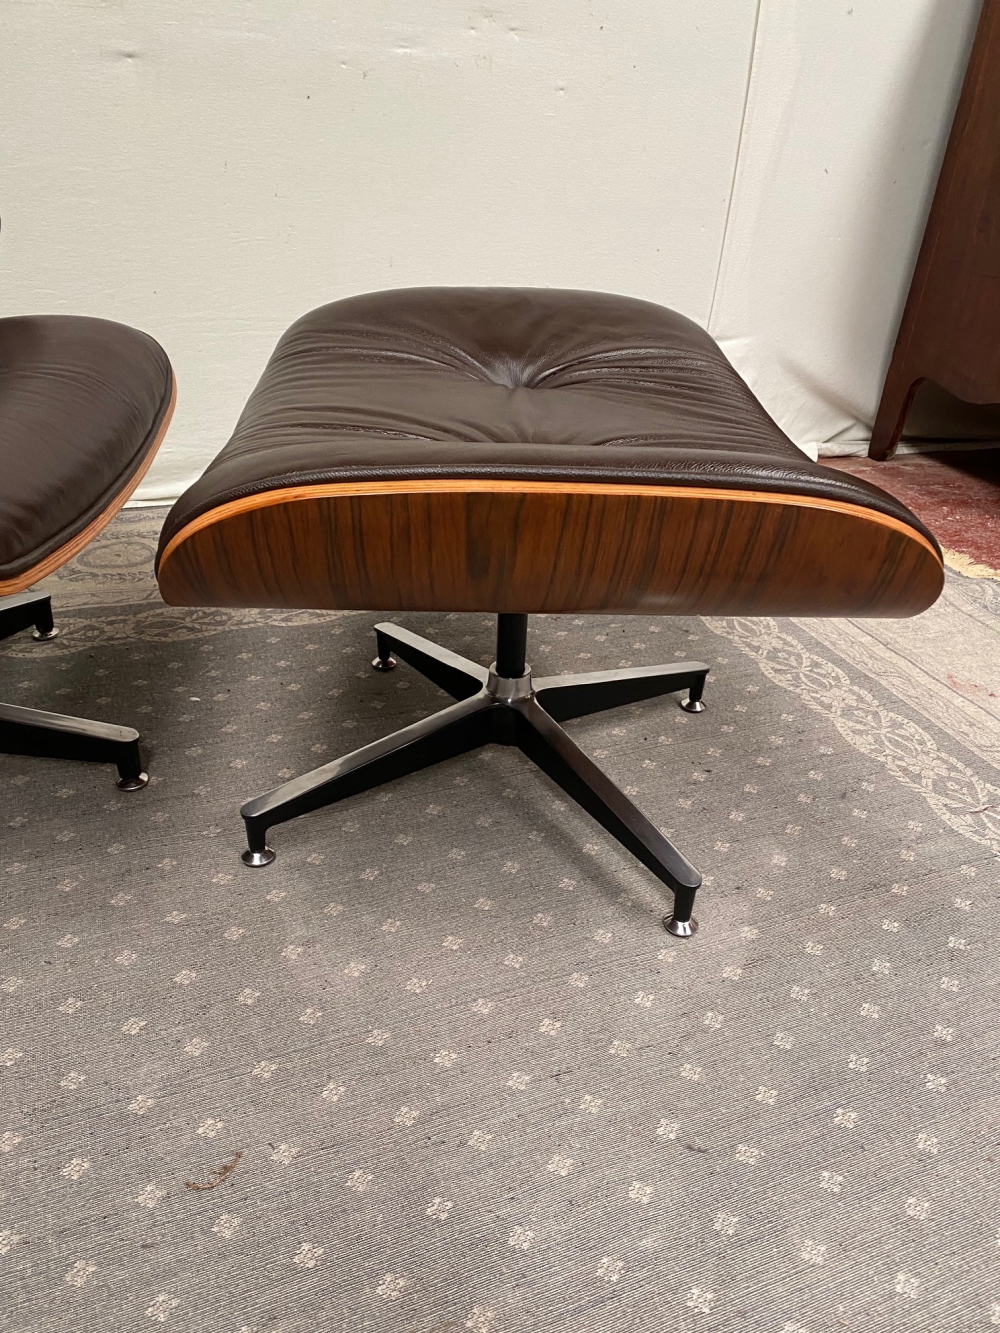 A CONTEMPORARY MID CENTURY MODERN STYLE LEATHER RECLINER CHAIR WITH FOOT STOOL, with rosewood frame - Image 3 of 6